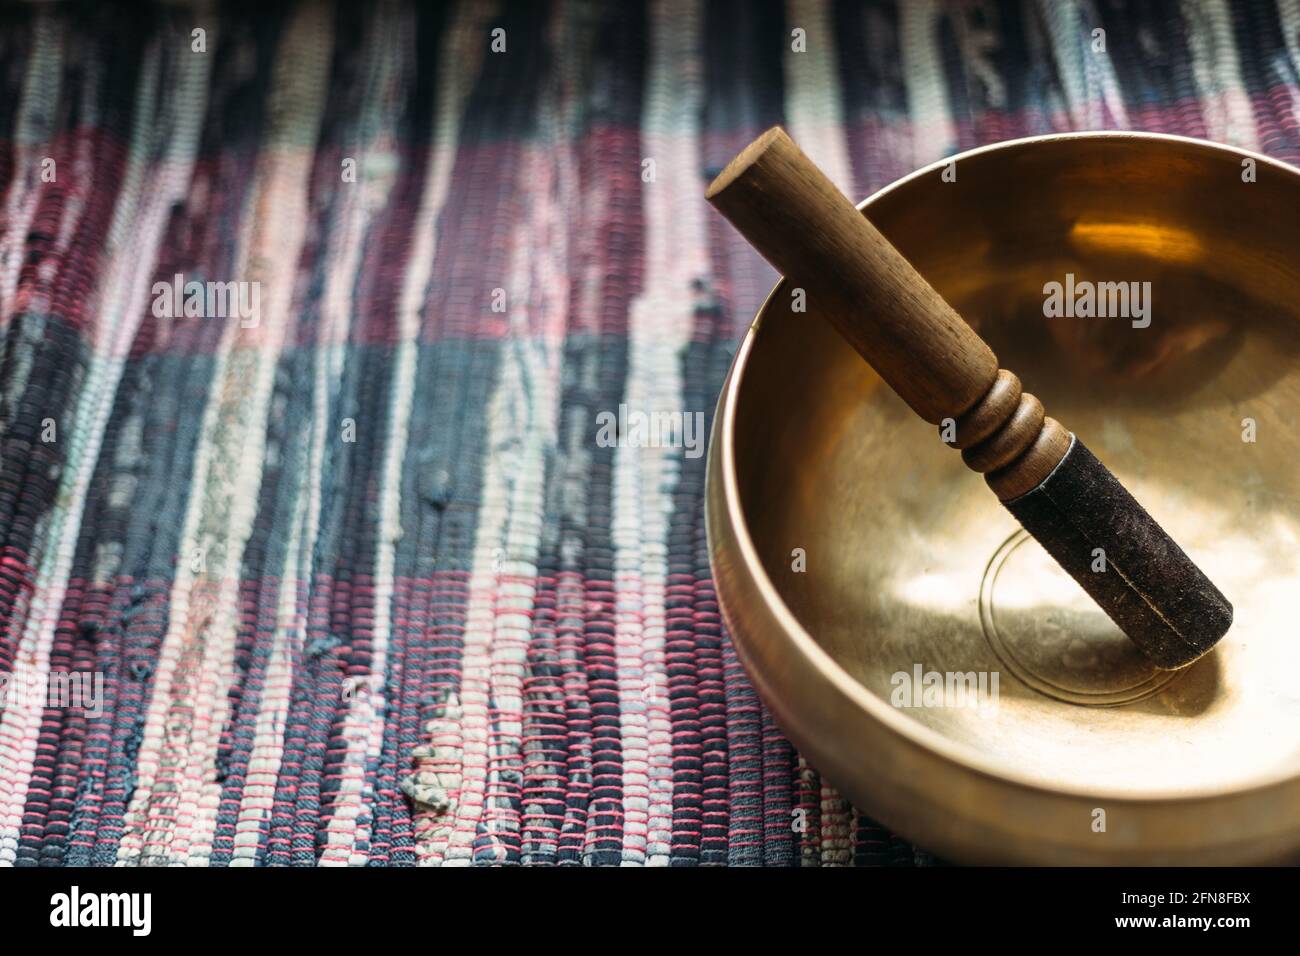 Tibetan singing bowl with a stick on a handmade woven carpet. Stock Photo